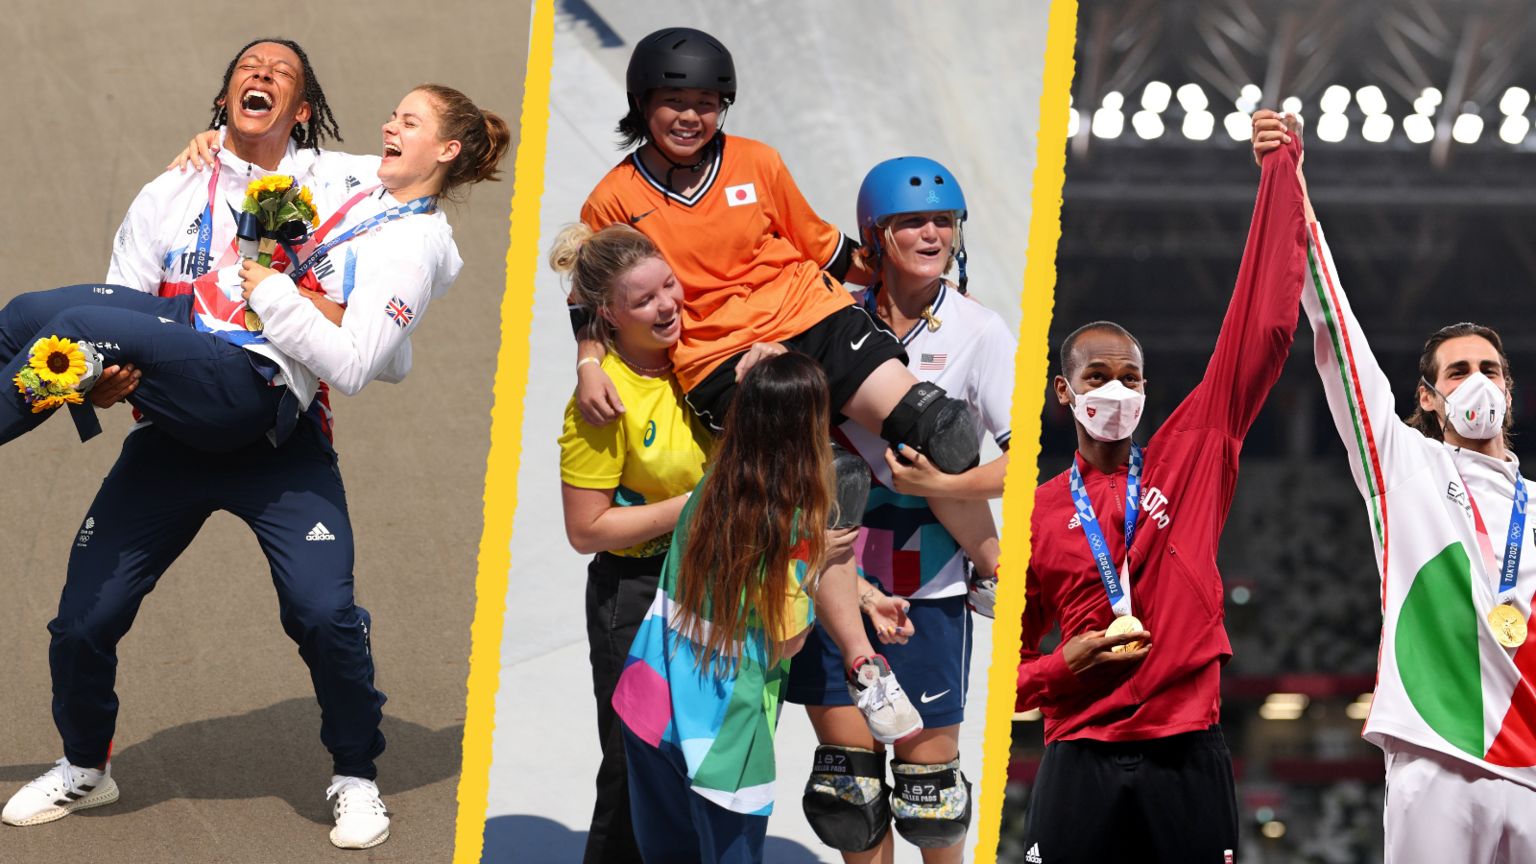 Bethany Shriver and Kye Whyte, the women's park skateboarders and Essa Barshim and Gianmarco Tamberi